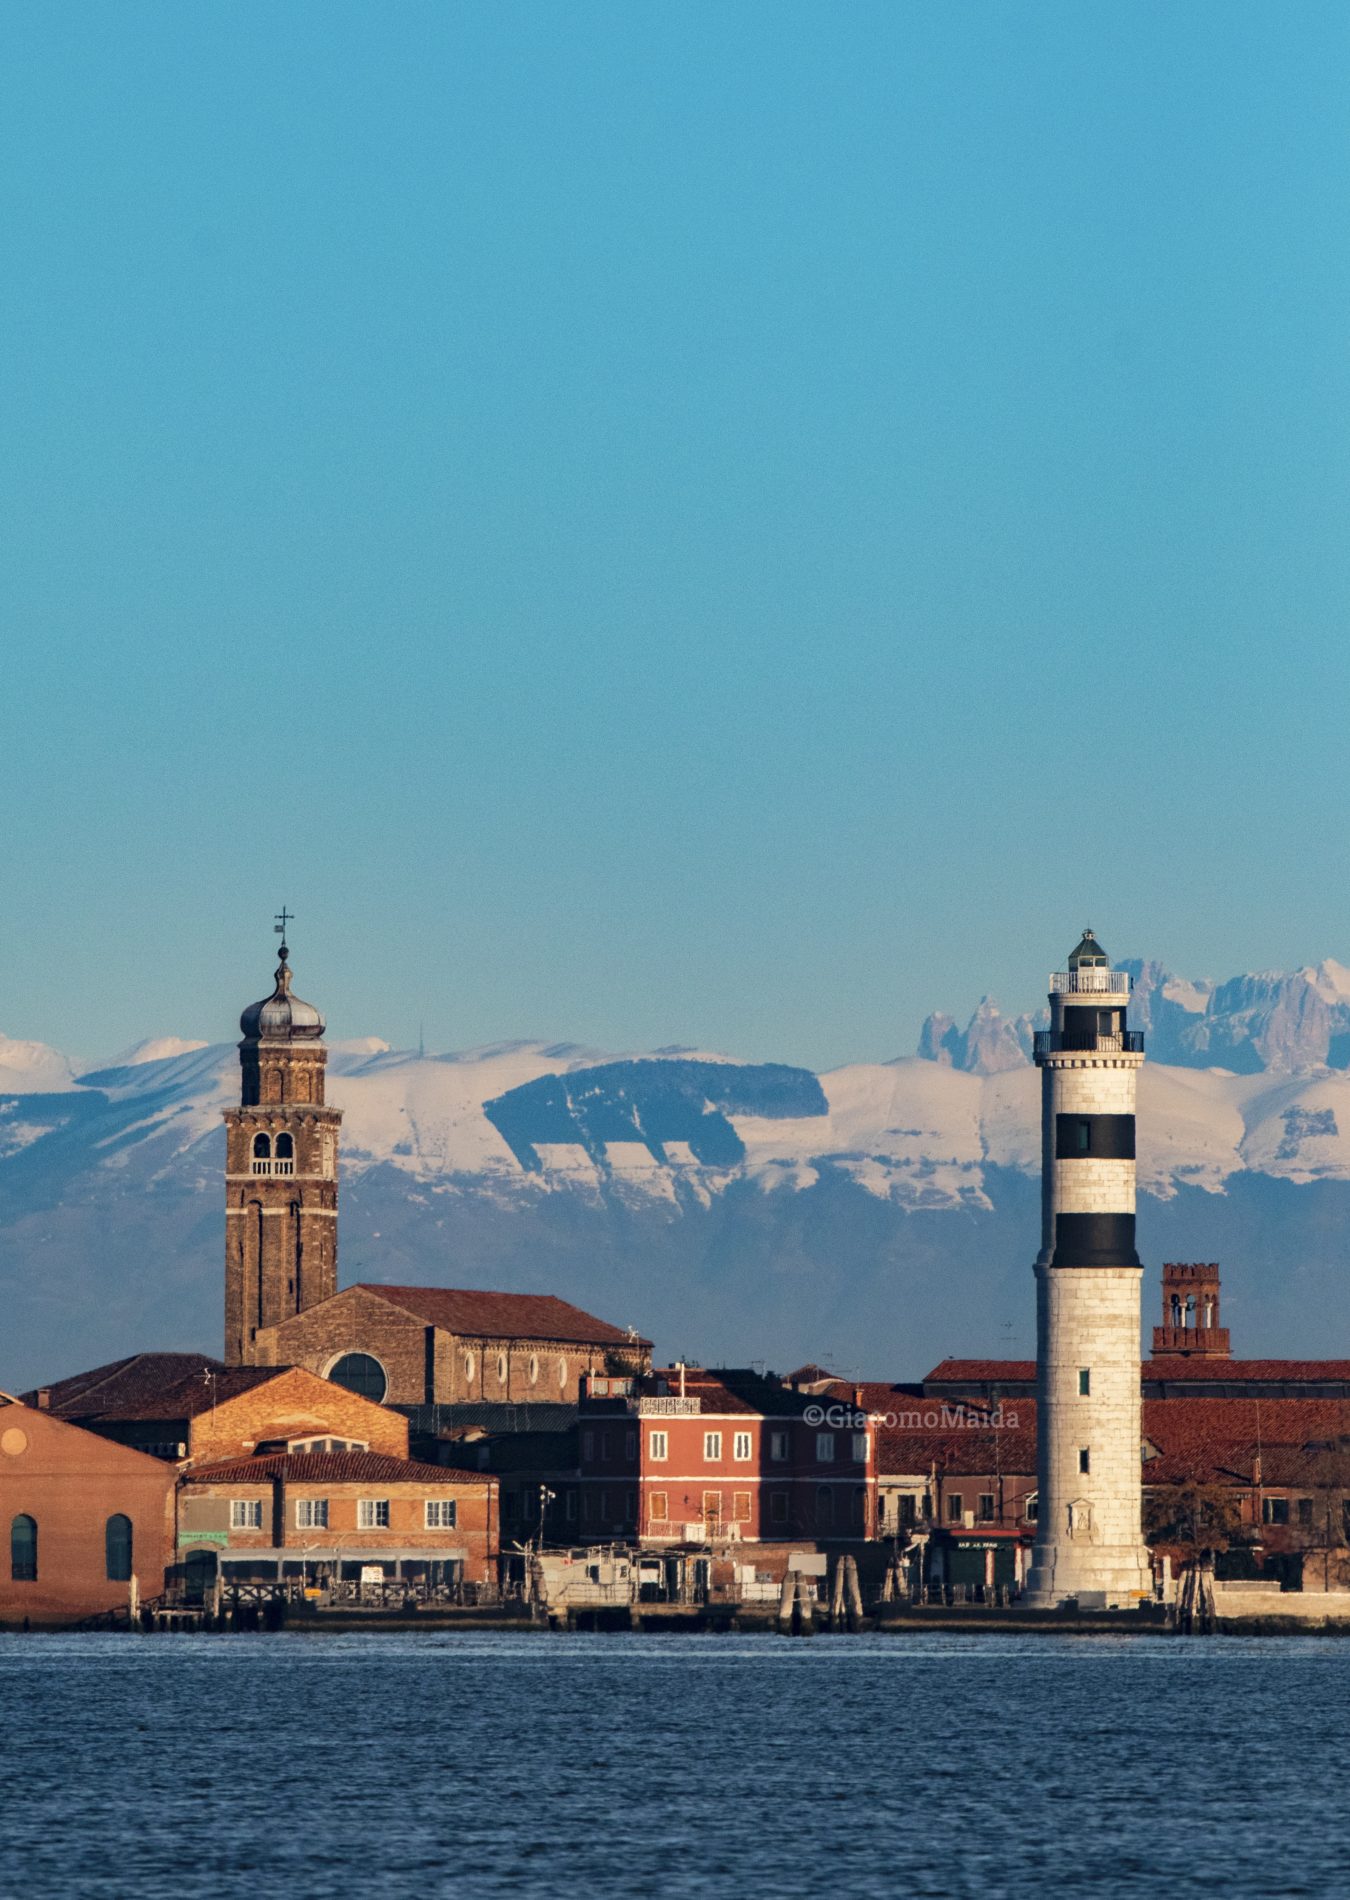 Venice Lagoon and Murano Island with Dolomites in the background. View from vaporetto.